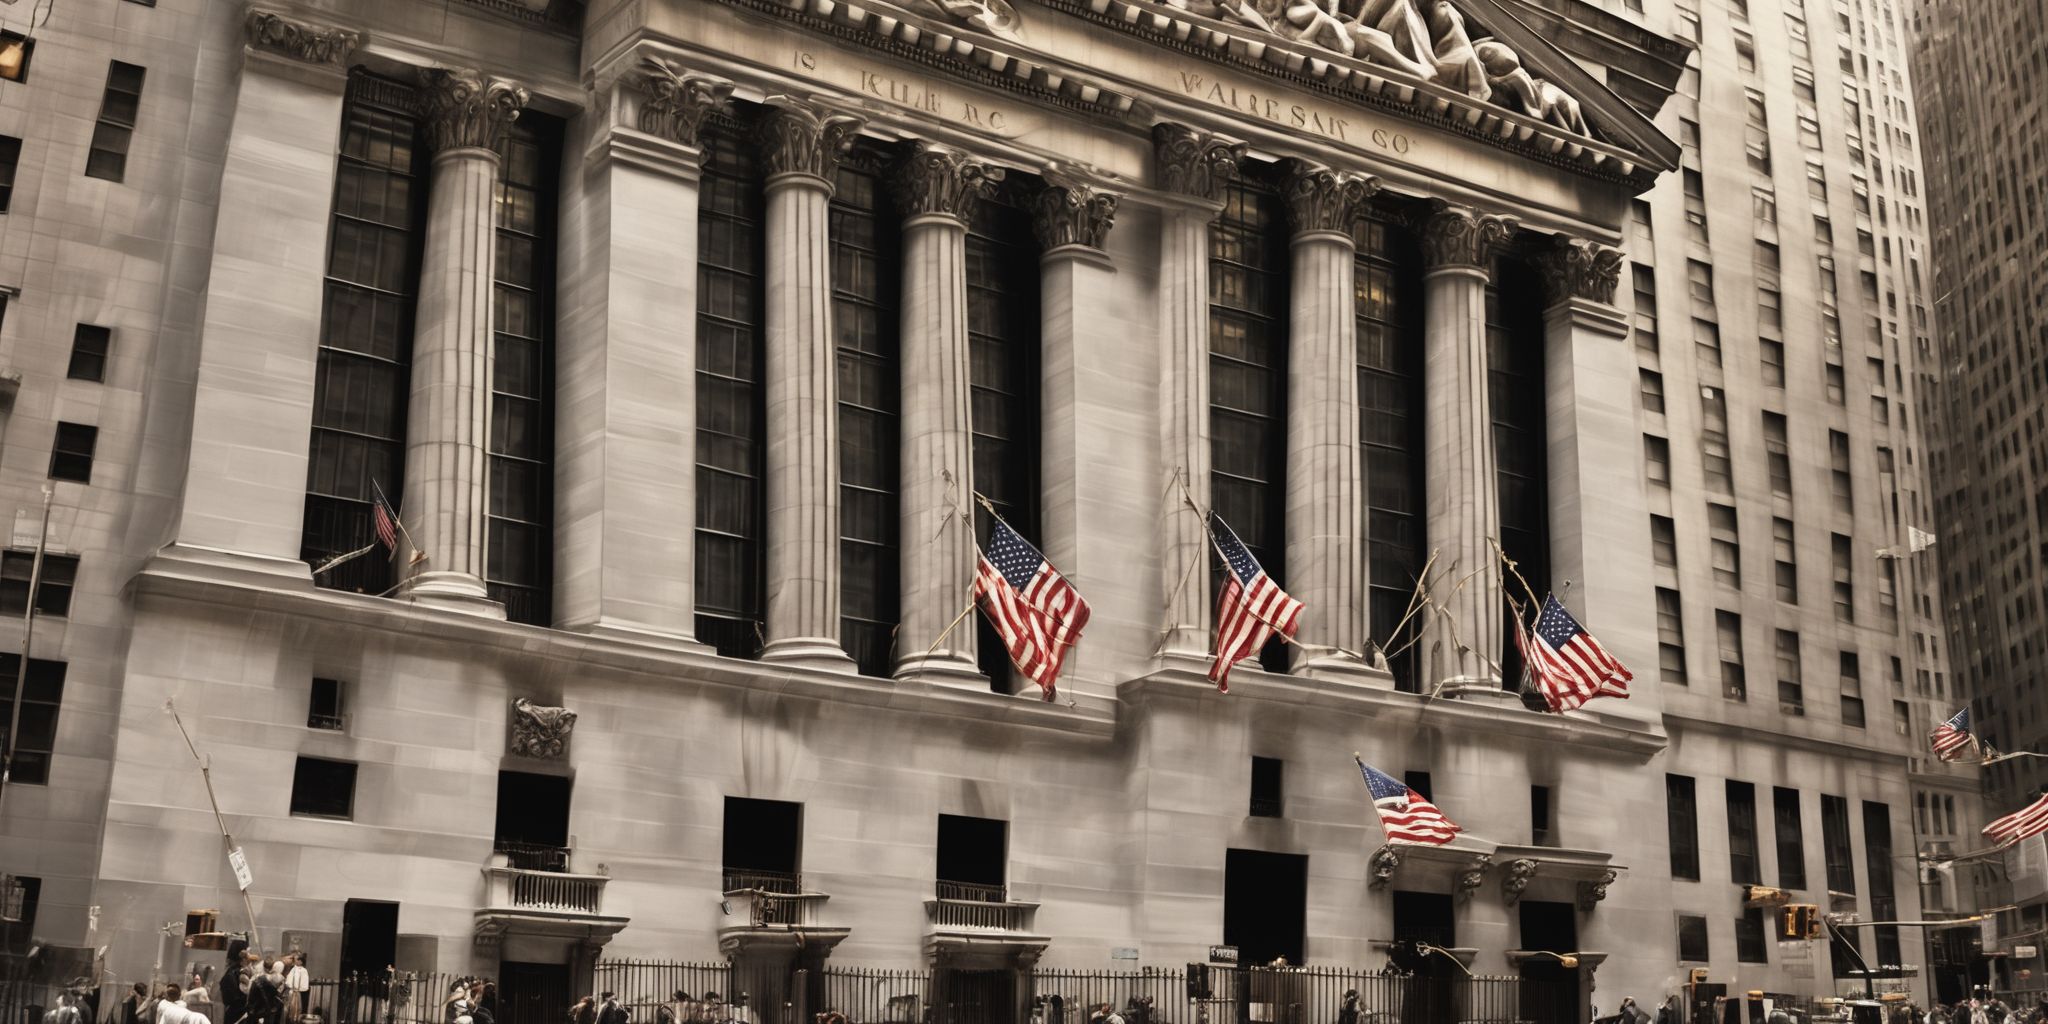 Wall Street  in realistic, photographic style